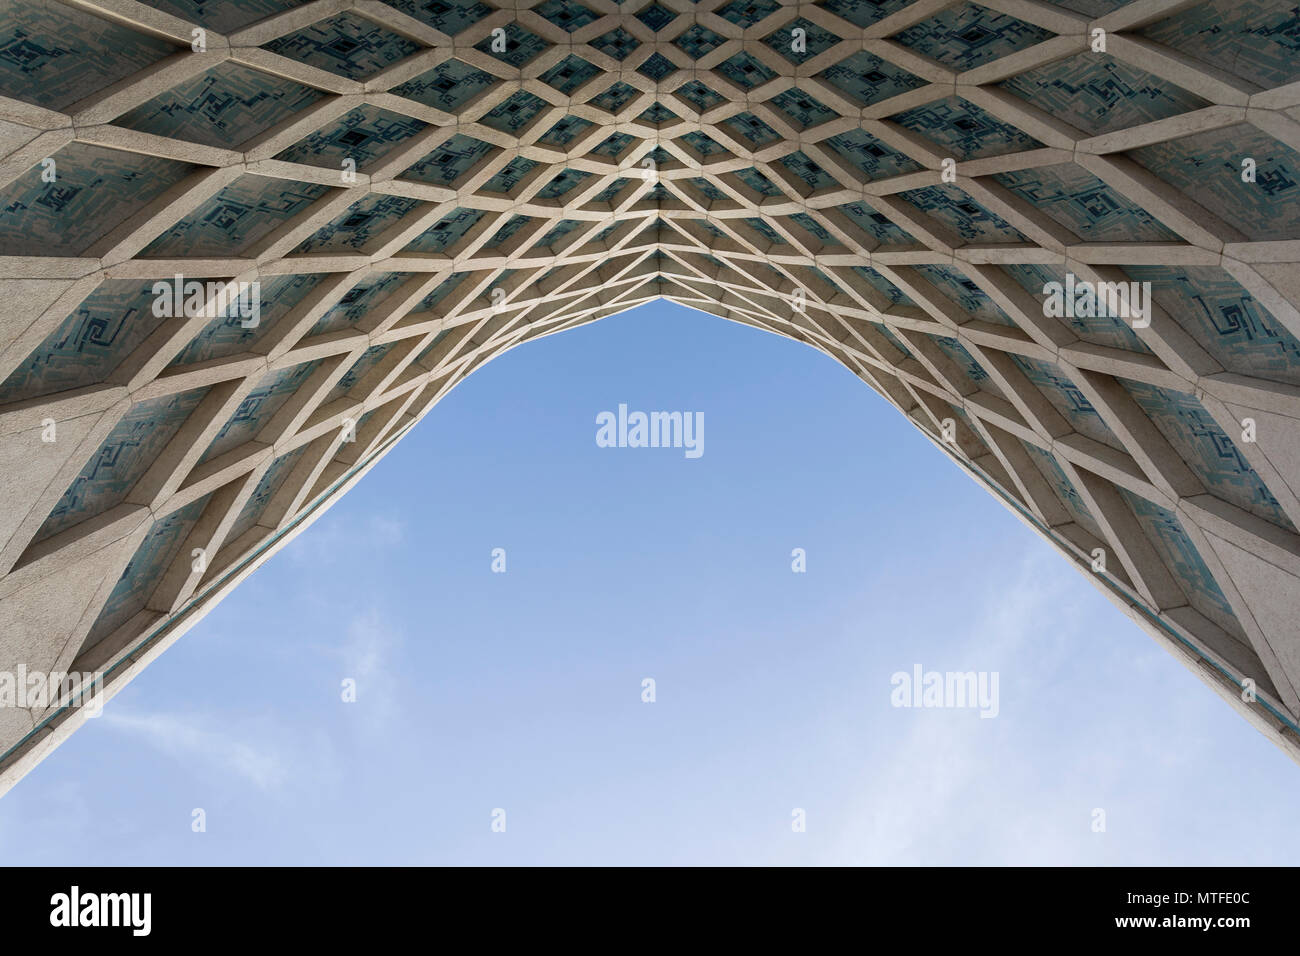 TEHRAN, IRAN - 7 May  2018 Detail of Azadi Tower gate formerly known as the Shahyad Tower is a monument located at Azadi square and is a landmark of T Stock Photo